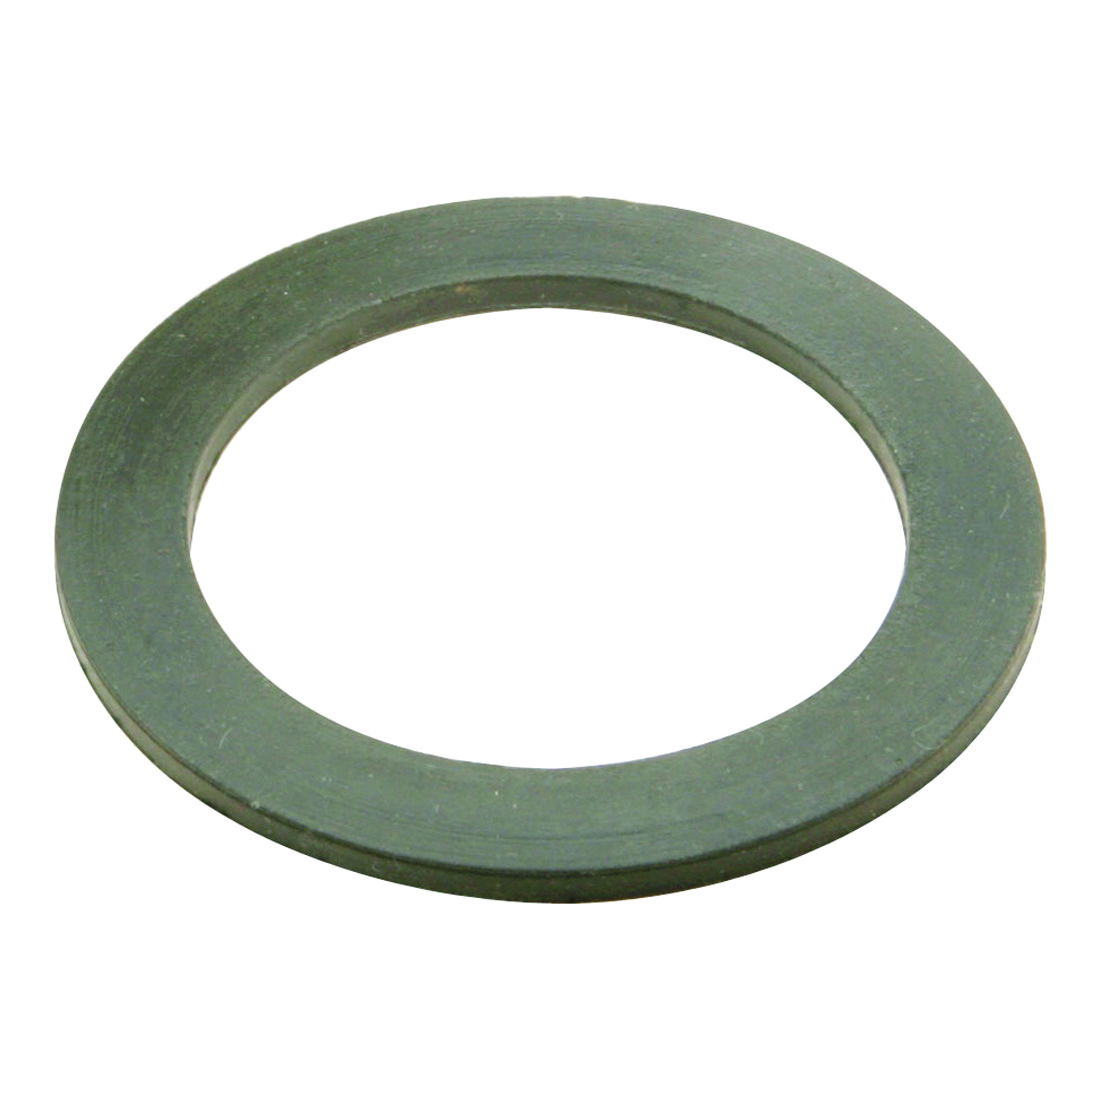 PP826-22 Waste Shoe Washer, 1-1/2 in Dia, Rubber, For: 1-1/2 in Bath Waste Strainer